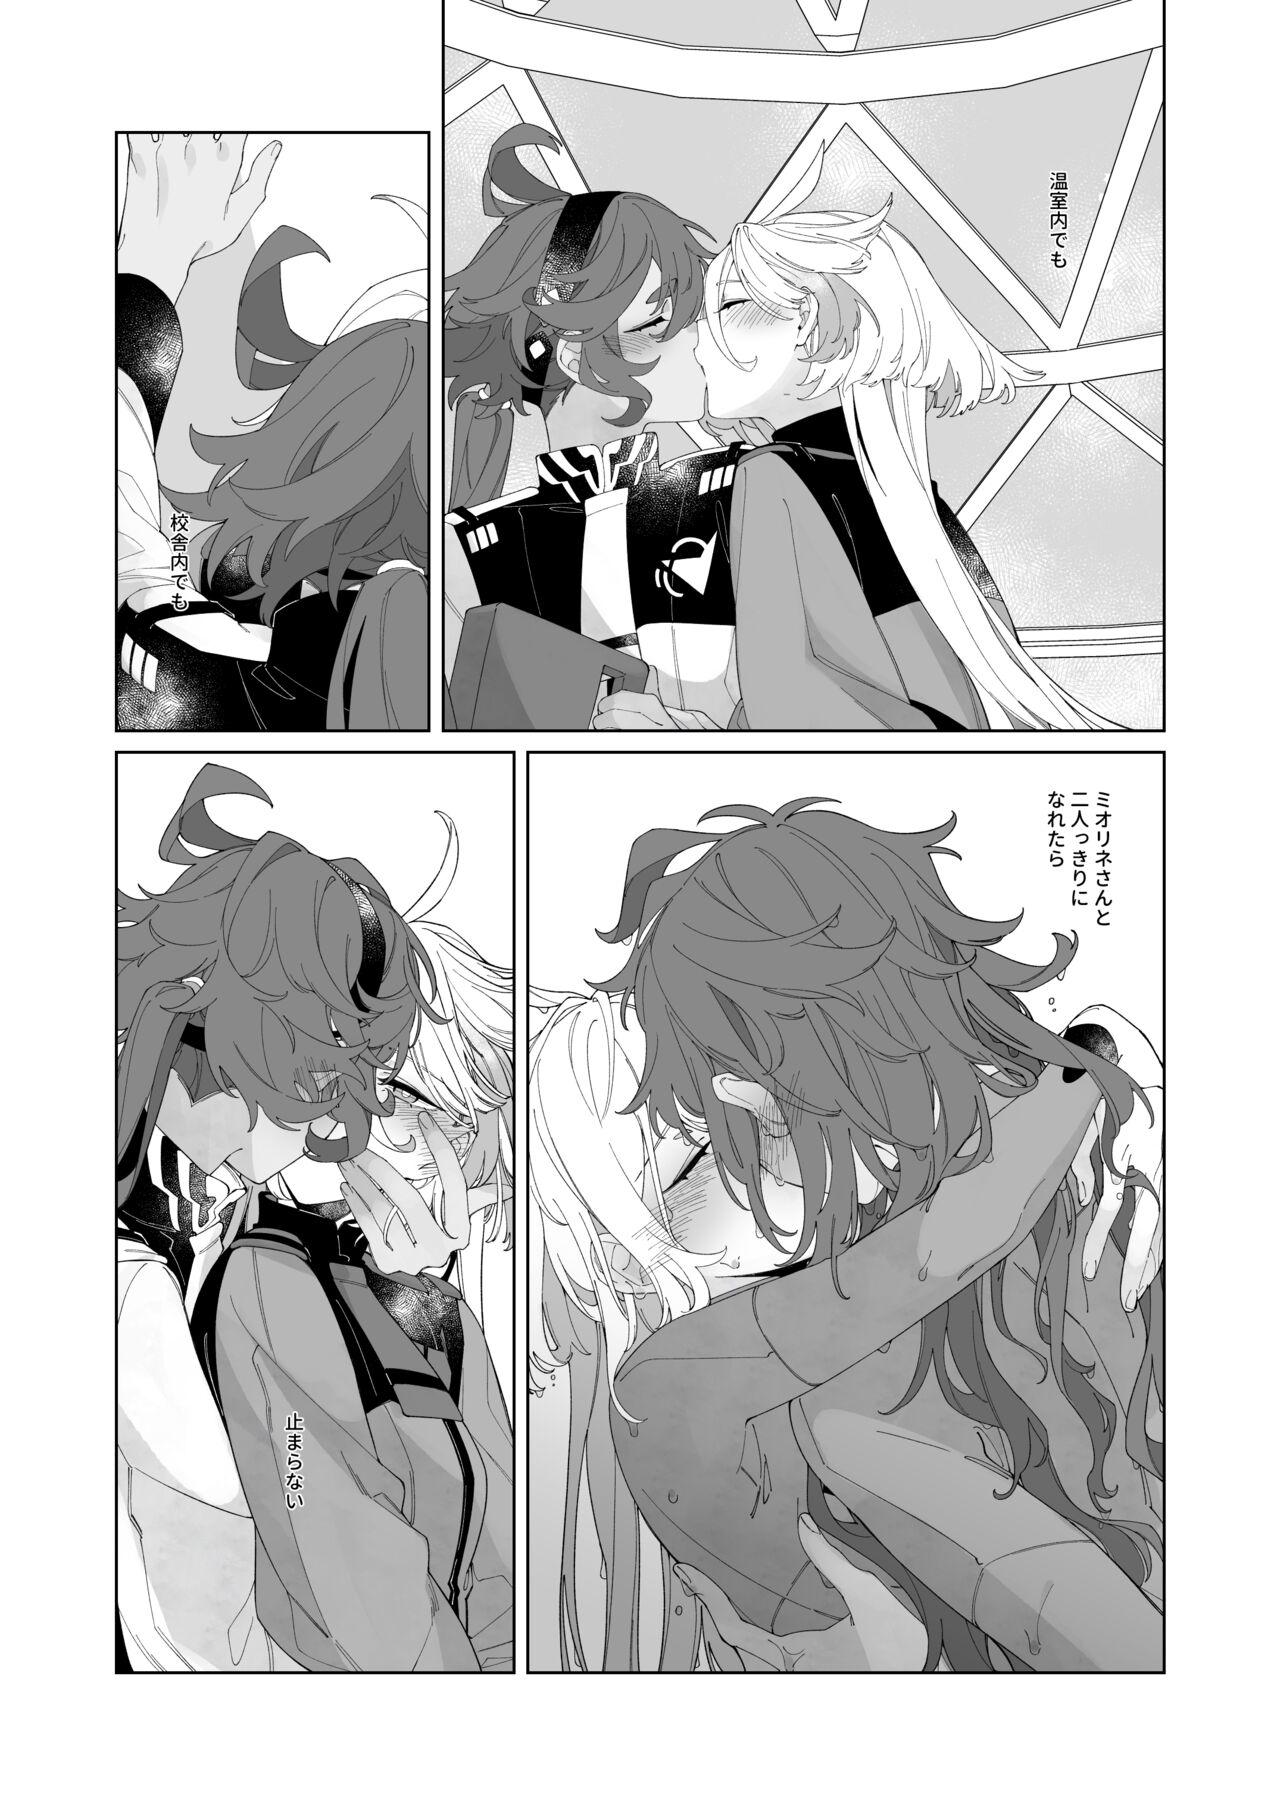 Gay College Kiss no Ato Nani ga Shitai? - After kissing, what else do you want to do? - Mobile suit gundam the witch from mercury Femdom Pov - Page 9